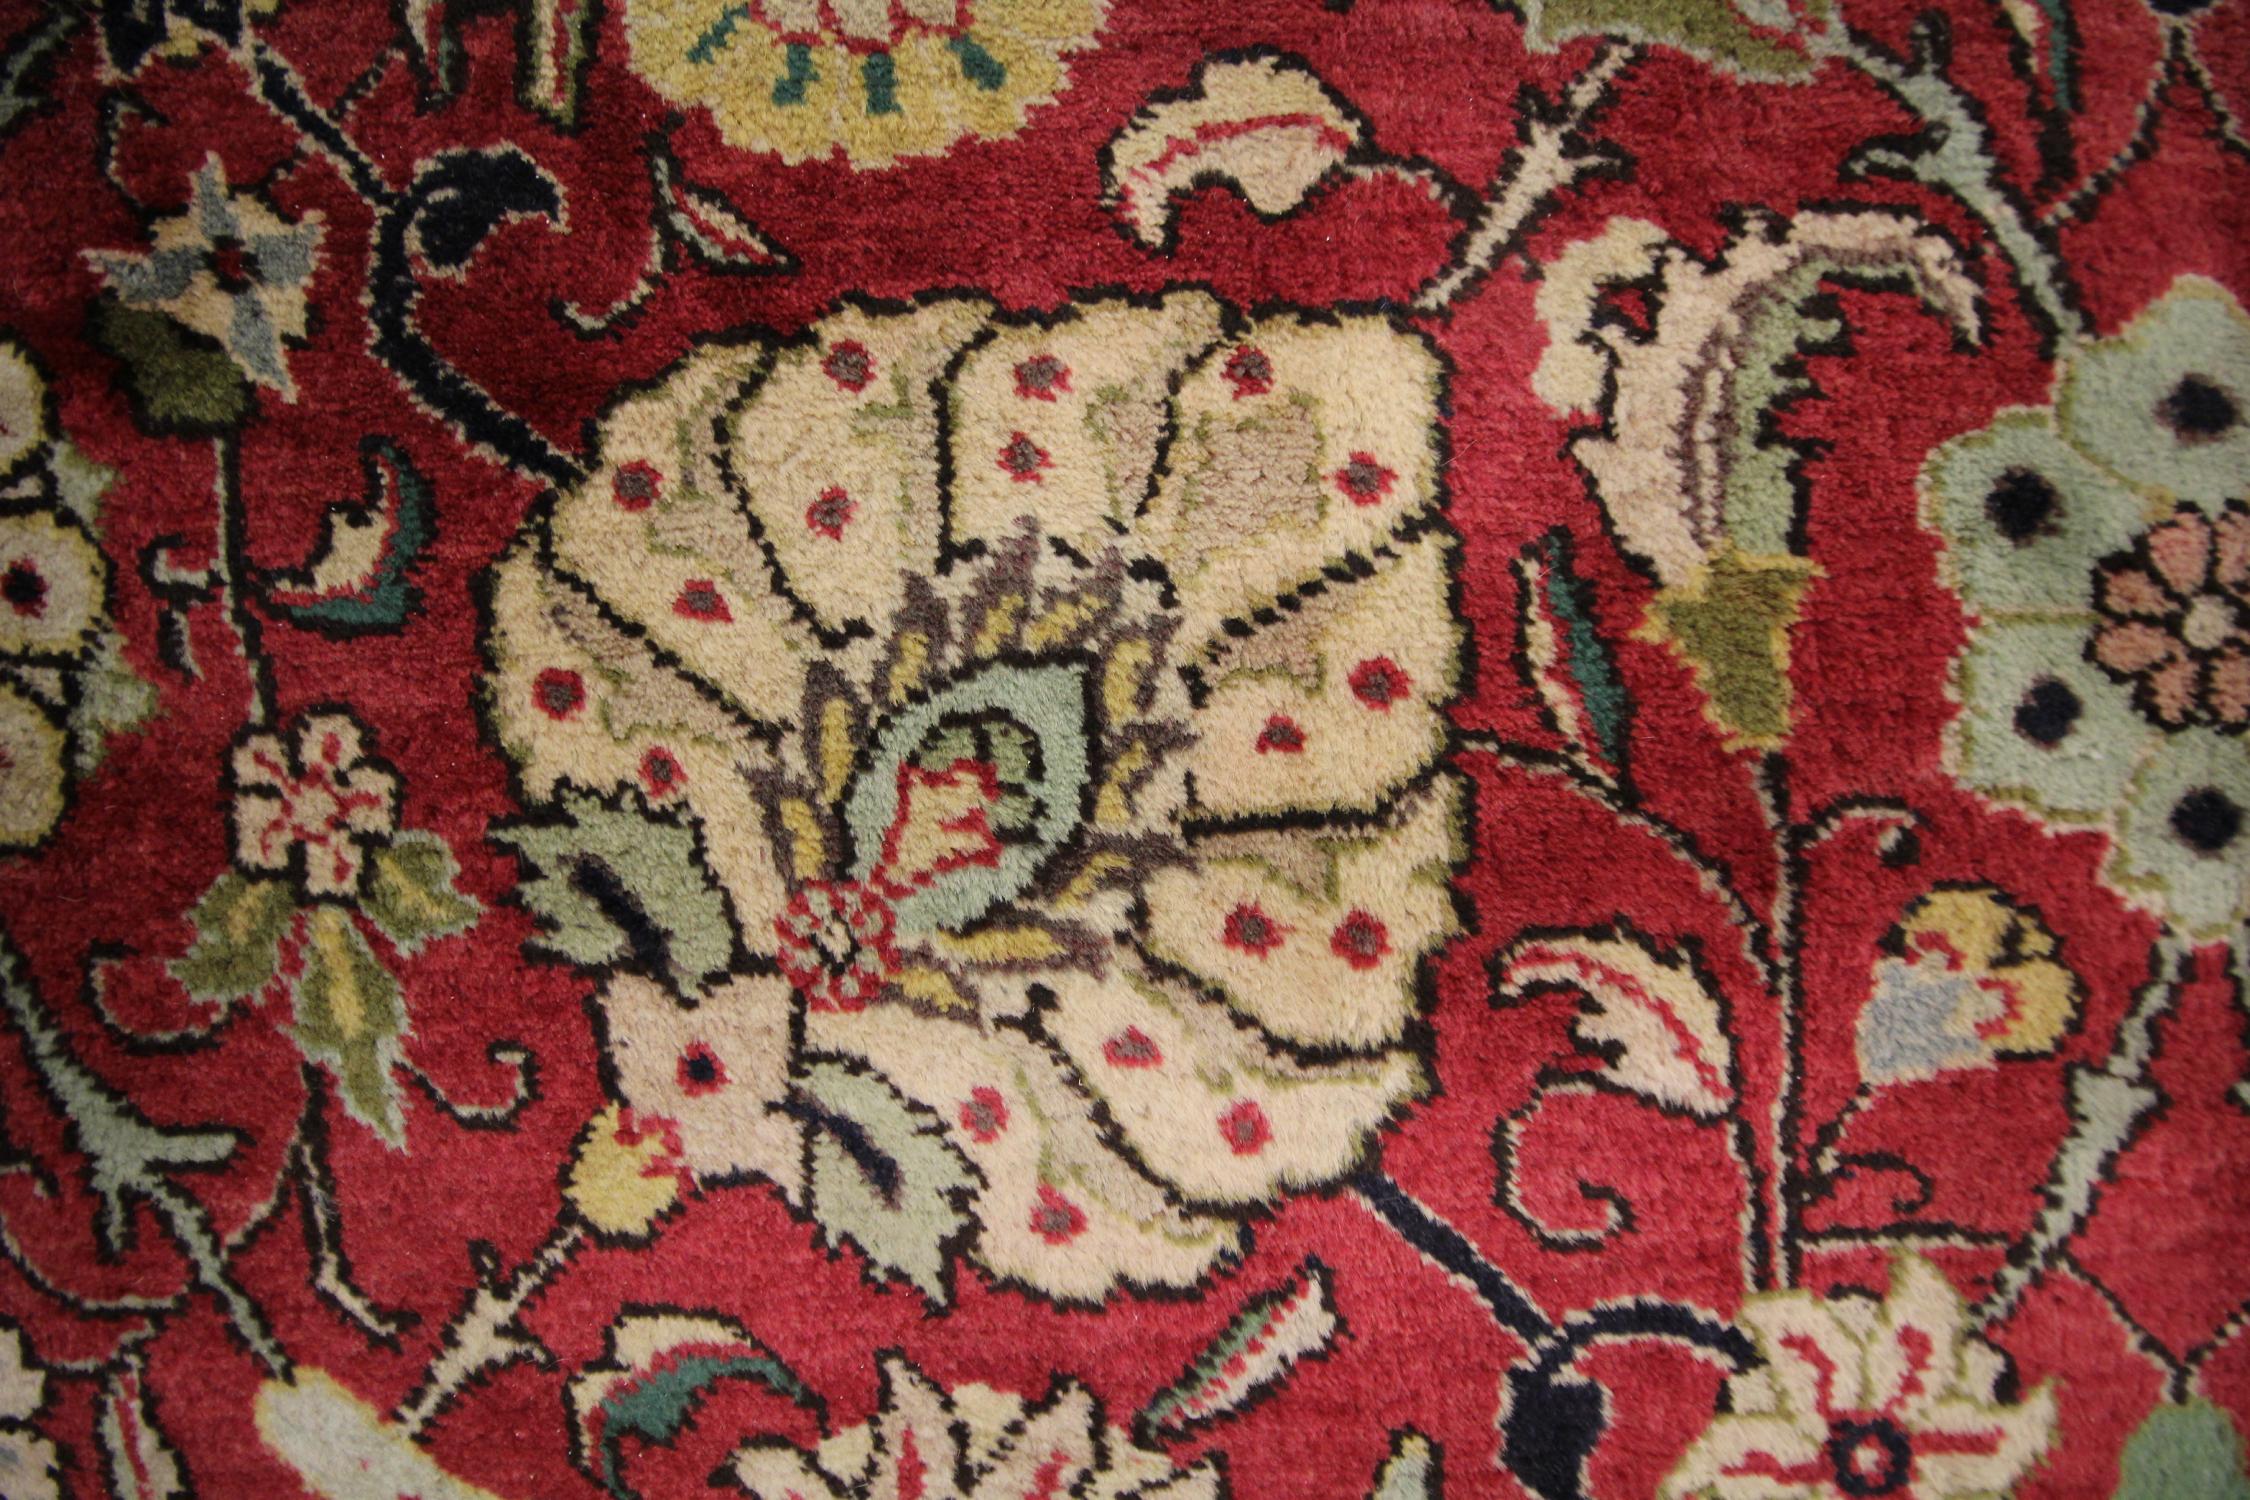 Turkish Large Vintage Rugs, Red All Over Carpet, Wool Living Room Rugs for Sale For Sale